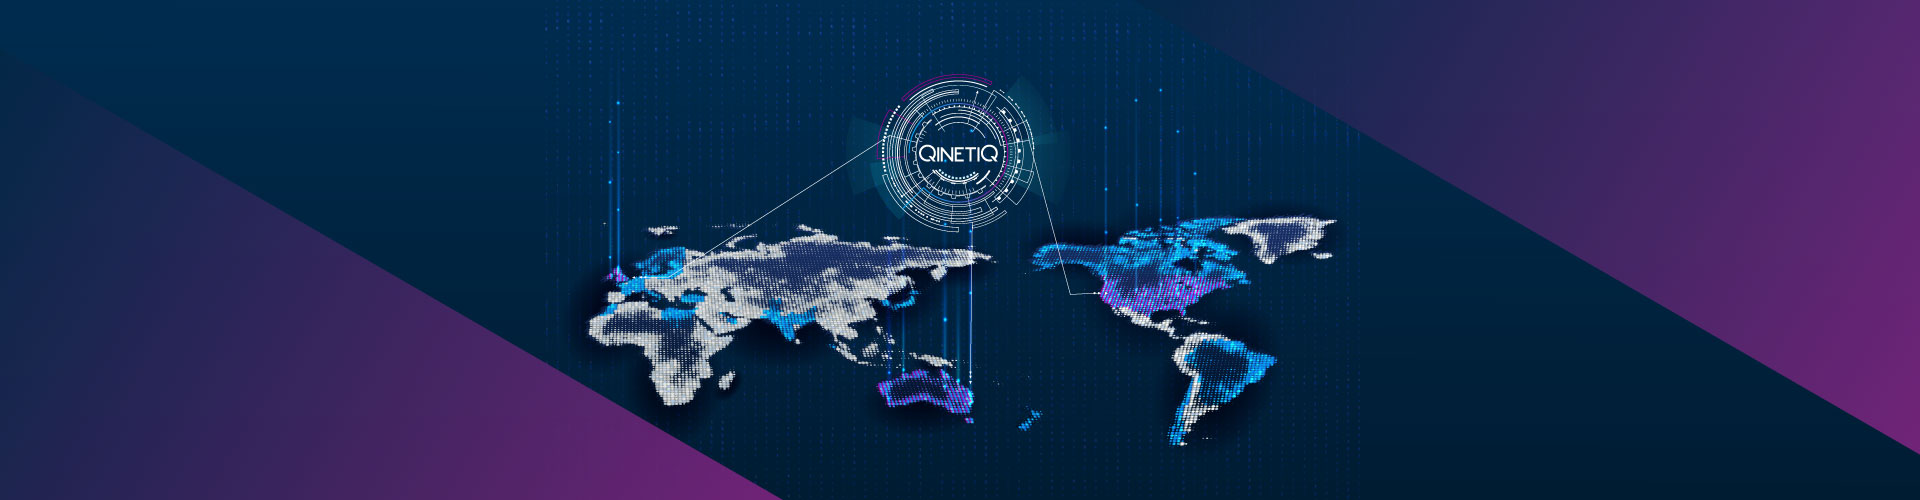 World map graphic pointing to QinetiQ locations